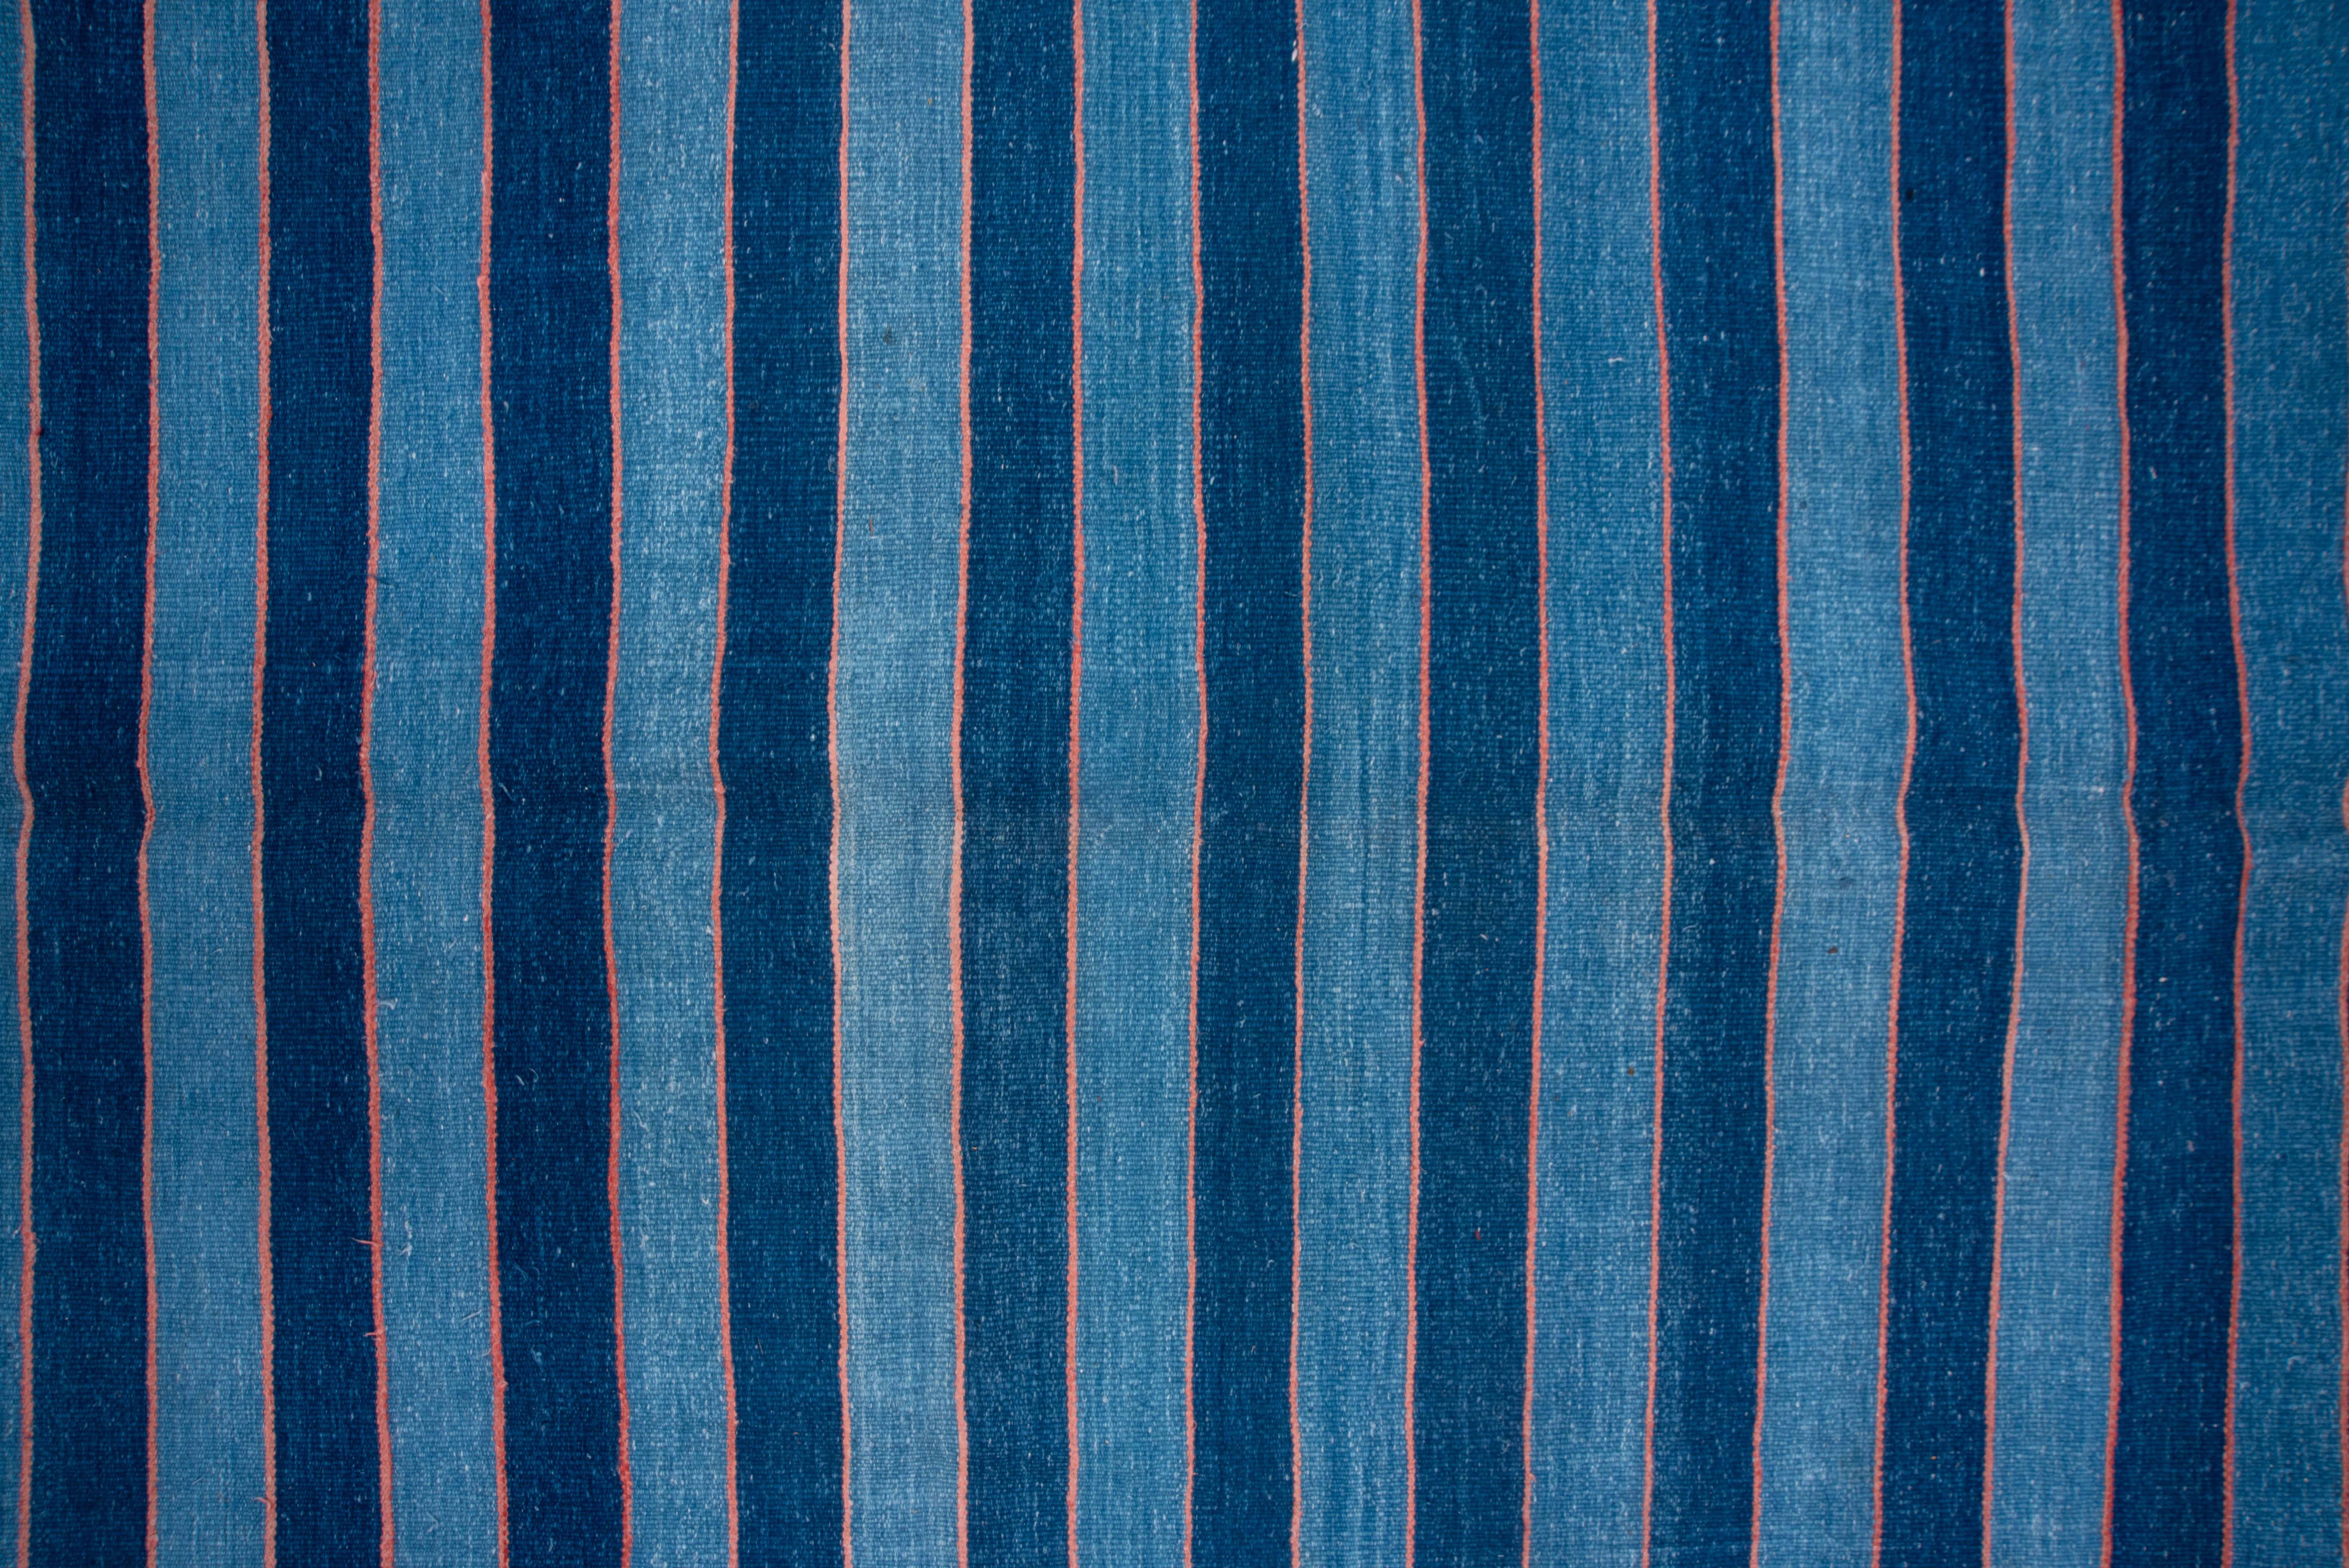 Indian Mid-20th Century Blue Striped Dhurrie Rug, Pink Accents, Signed by the Weaver